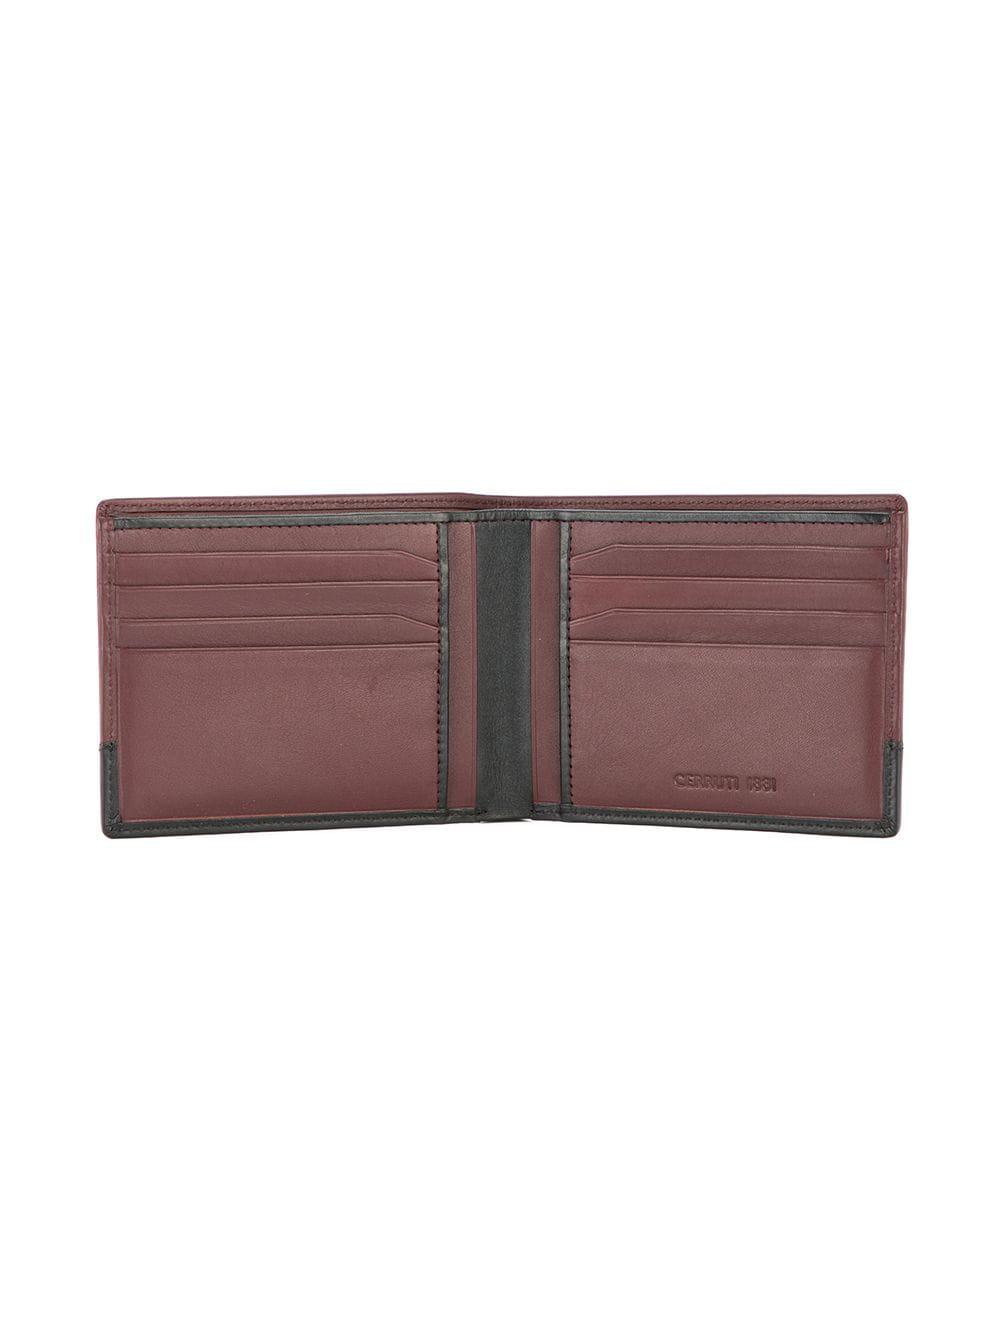 Cerruti 1881 Leather Two-tone Foldover Wallet in Brown for Men - Lyst